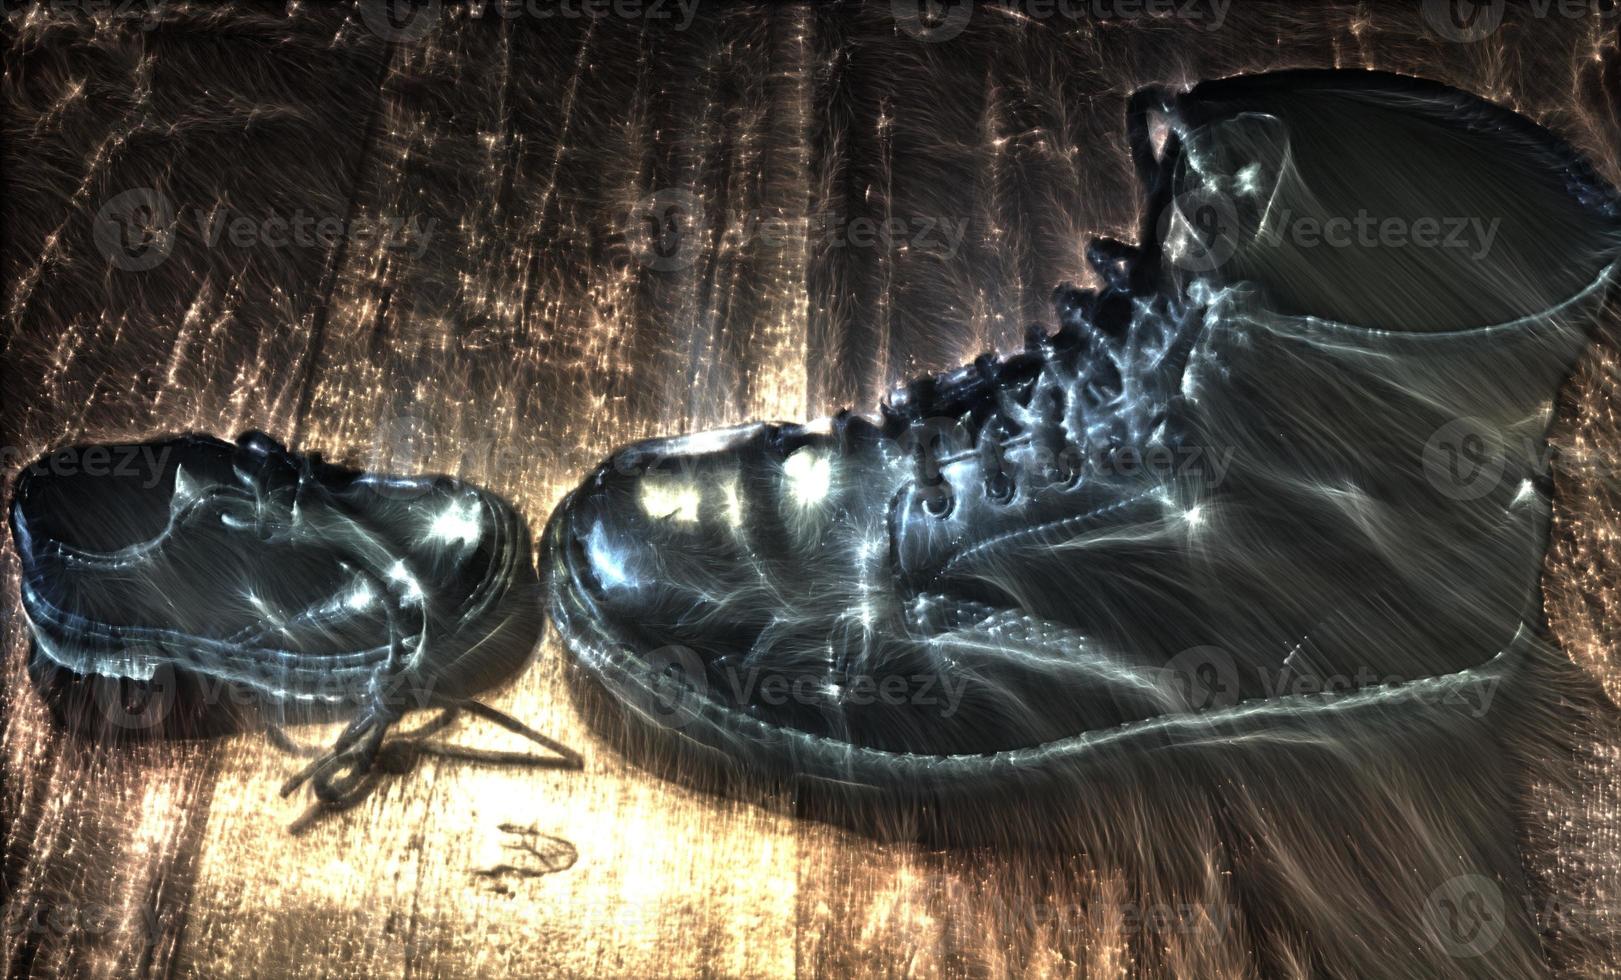 3D-Illustration of kirlian energy on a Big and small black leather shoe on a wooden floor photo